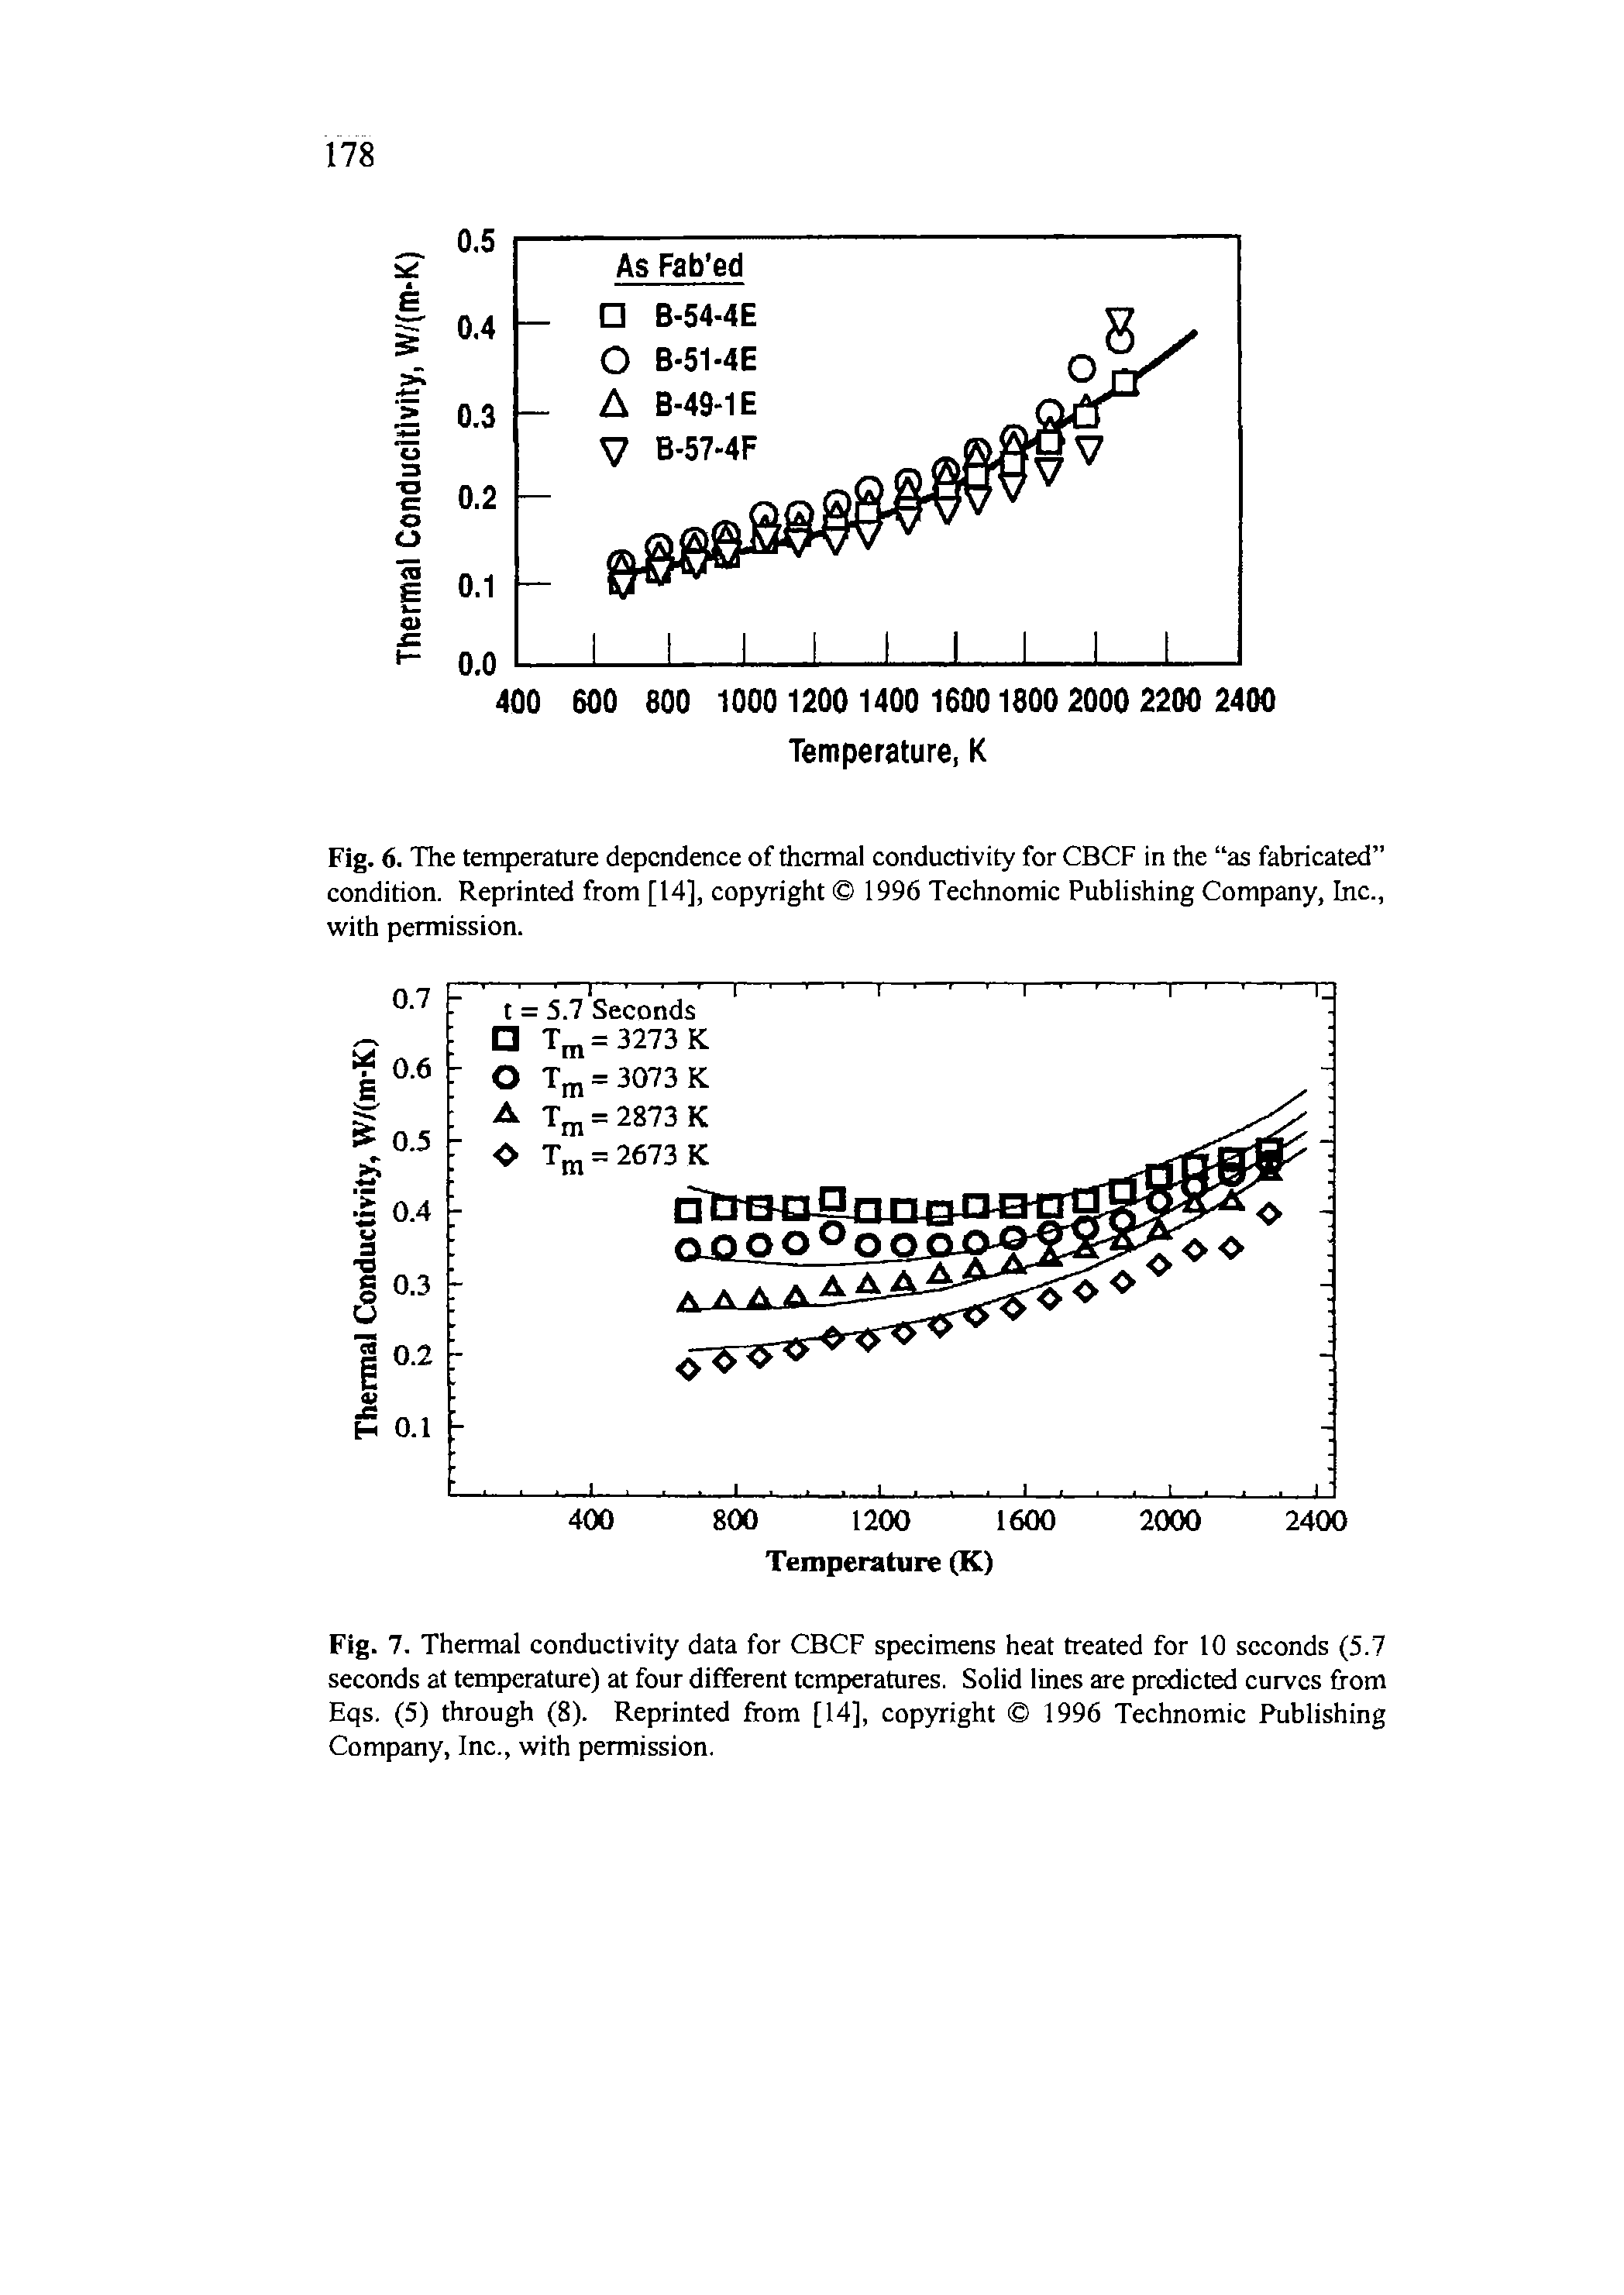 Fig. 6. The temperature dependence of thermal conductivity for CBCF in the as fabricated condition. Reprinted from [14], copyright 1996 Technomic Publishing Company, Inc., with permission.